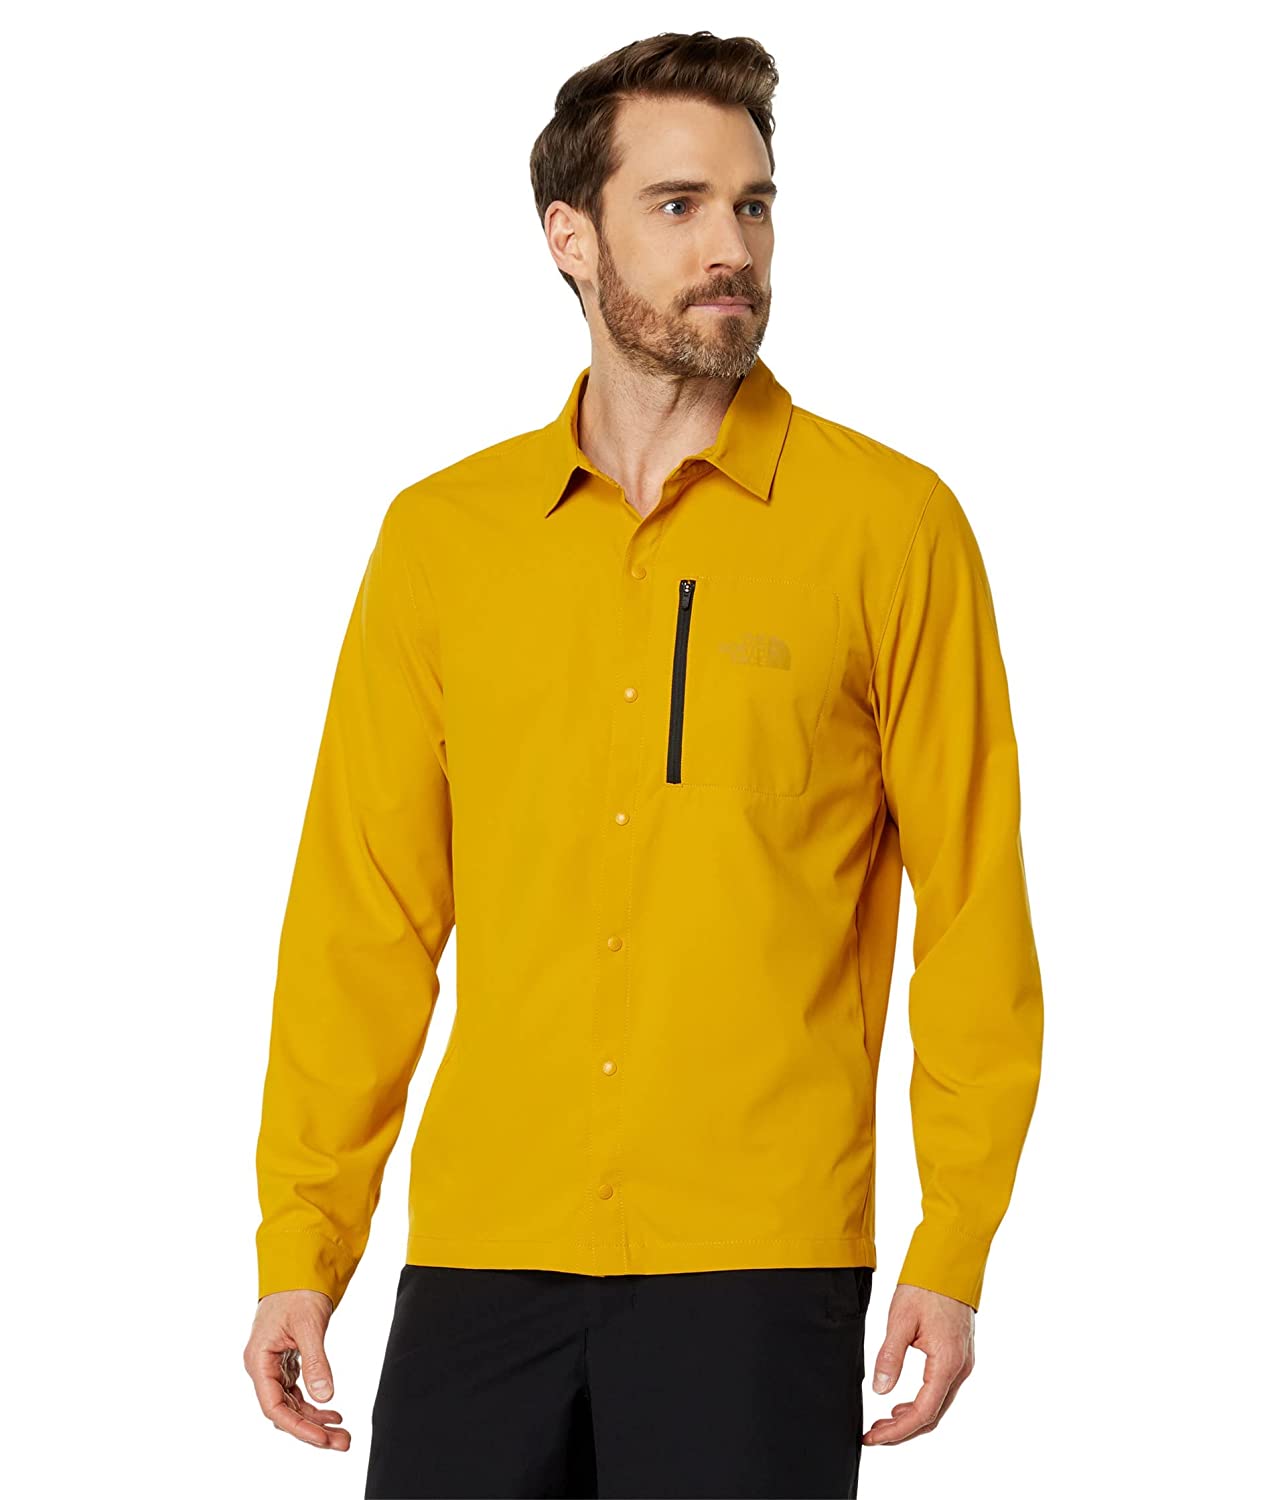 The North Face Men's First Trail LS Shirt